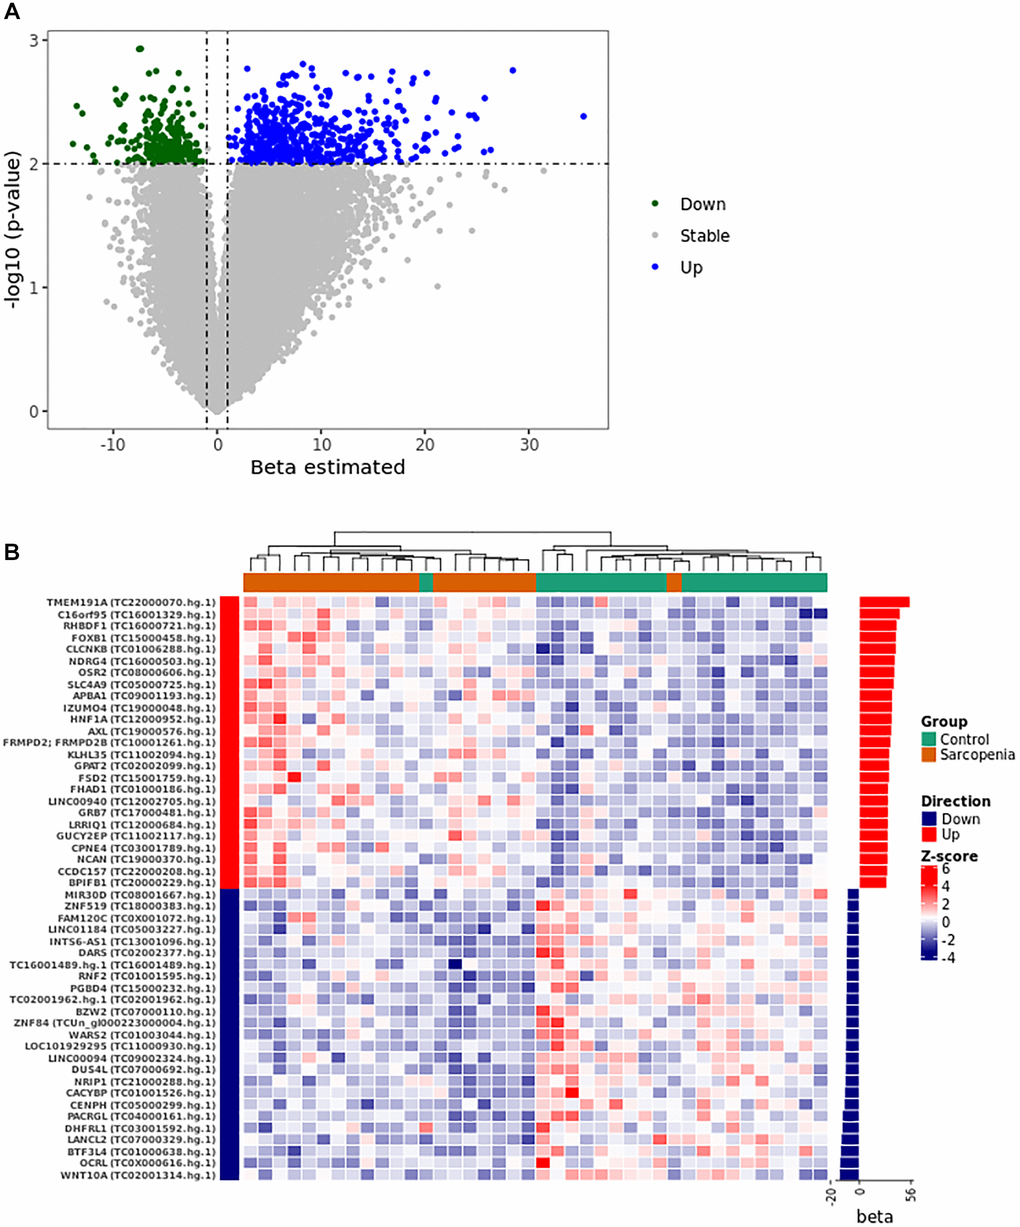 Gene expression pattern from the logistical regression analysis. (A) The volcano plot was constructed using the full list of 67528 transcript clusters analyzed. The top 821 transcripts were highlighted in blue (556 PPR) and green (255 PNR). A p-value of 1 was considered statistically significant. (B) The heat map shows the unsupervised clustering of the normalized expression pattern. The dendrogram indicates two clusters that stratified LMM and control group in distinct clusters. The right panel of the heat map shows the bar graph of beta coefficient values. Abbreviations: Beta: Estimated logistic regression coefficient; PPR: Predictor with Positive Relationship also called Up in panel A and B; PNR: Predictor with Negative Relationship also called Down in panel A and B.